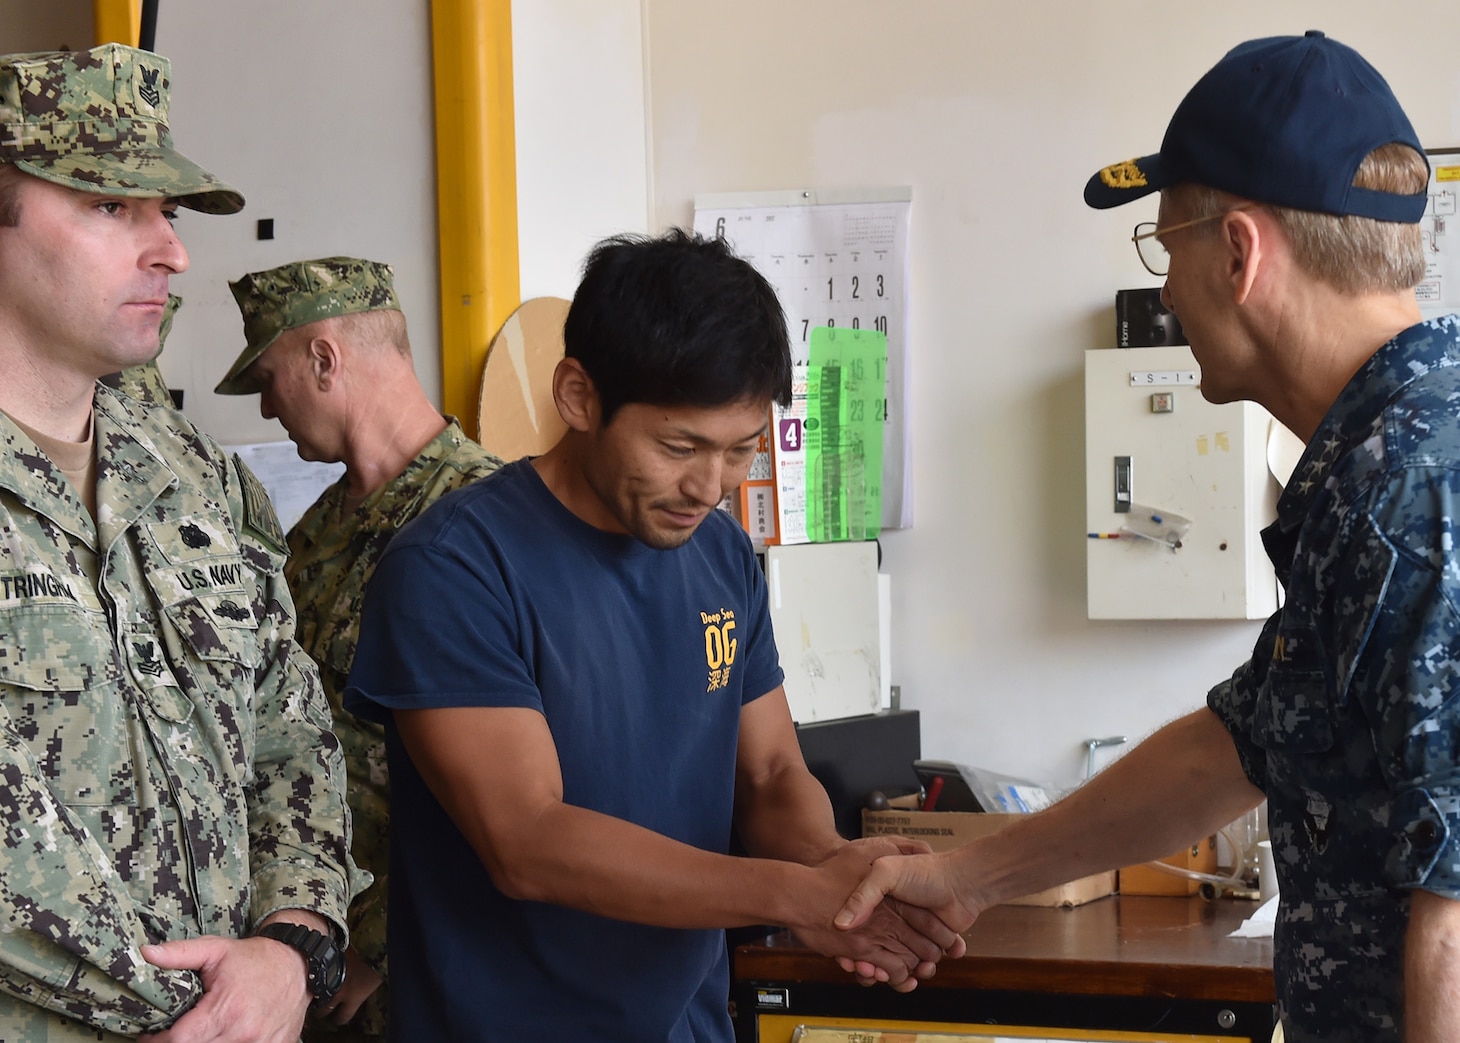 YOKOSUKA, Japan (June 19, 2017) Vice Adm. Joseph Aucoin, commander of U.S. 7th Fleet, thanks Masaki Kanno, a Japanese professional diver, for his work on the guided-missile destroyer USS Fitzgerald (DDG 62) afer its collision with a merchant vessel, June 17, 2017. Fitzgerald suffered severe damage, but returned to Fleet Activities Yokosuka under its own power. The incident is under investigation. (U.S. Navy photo by Mass Communication Specialist 2nd Class Richard L.J. Gourley/Released)